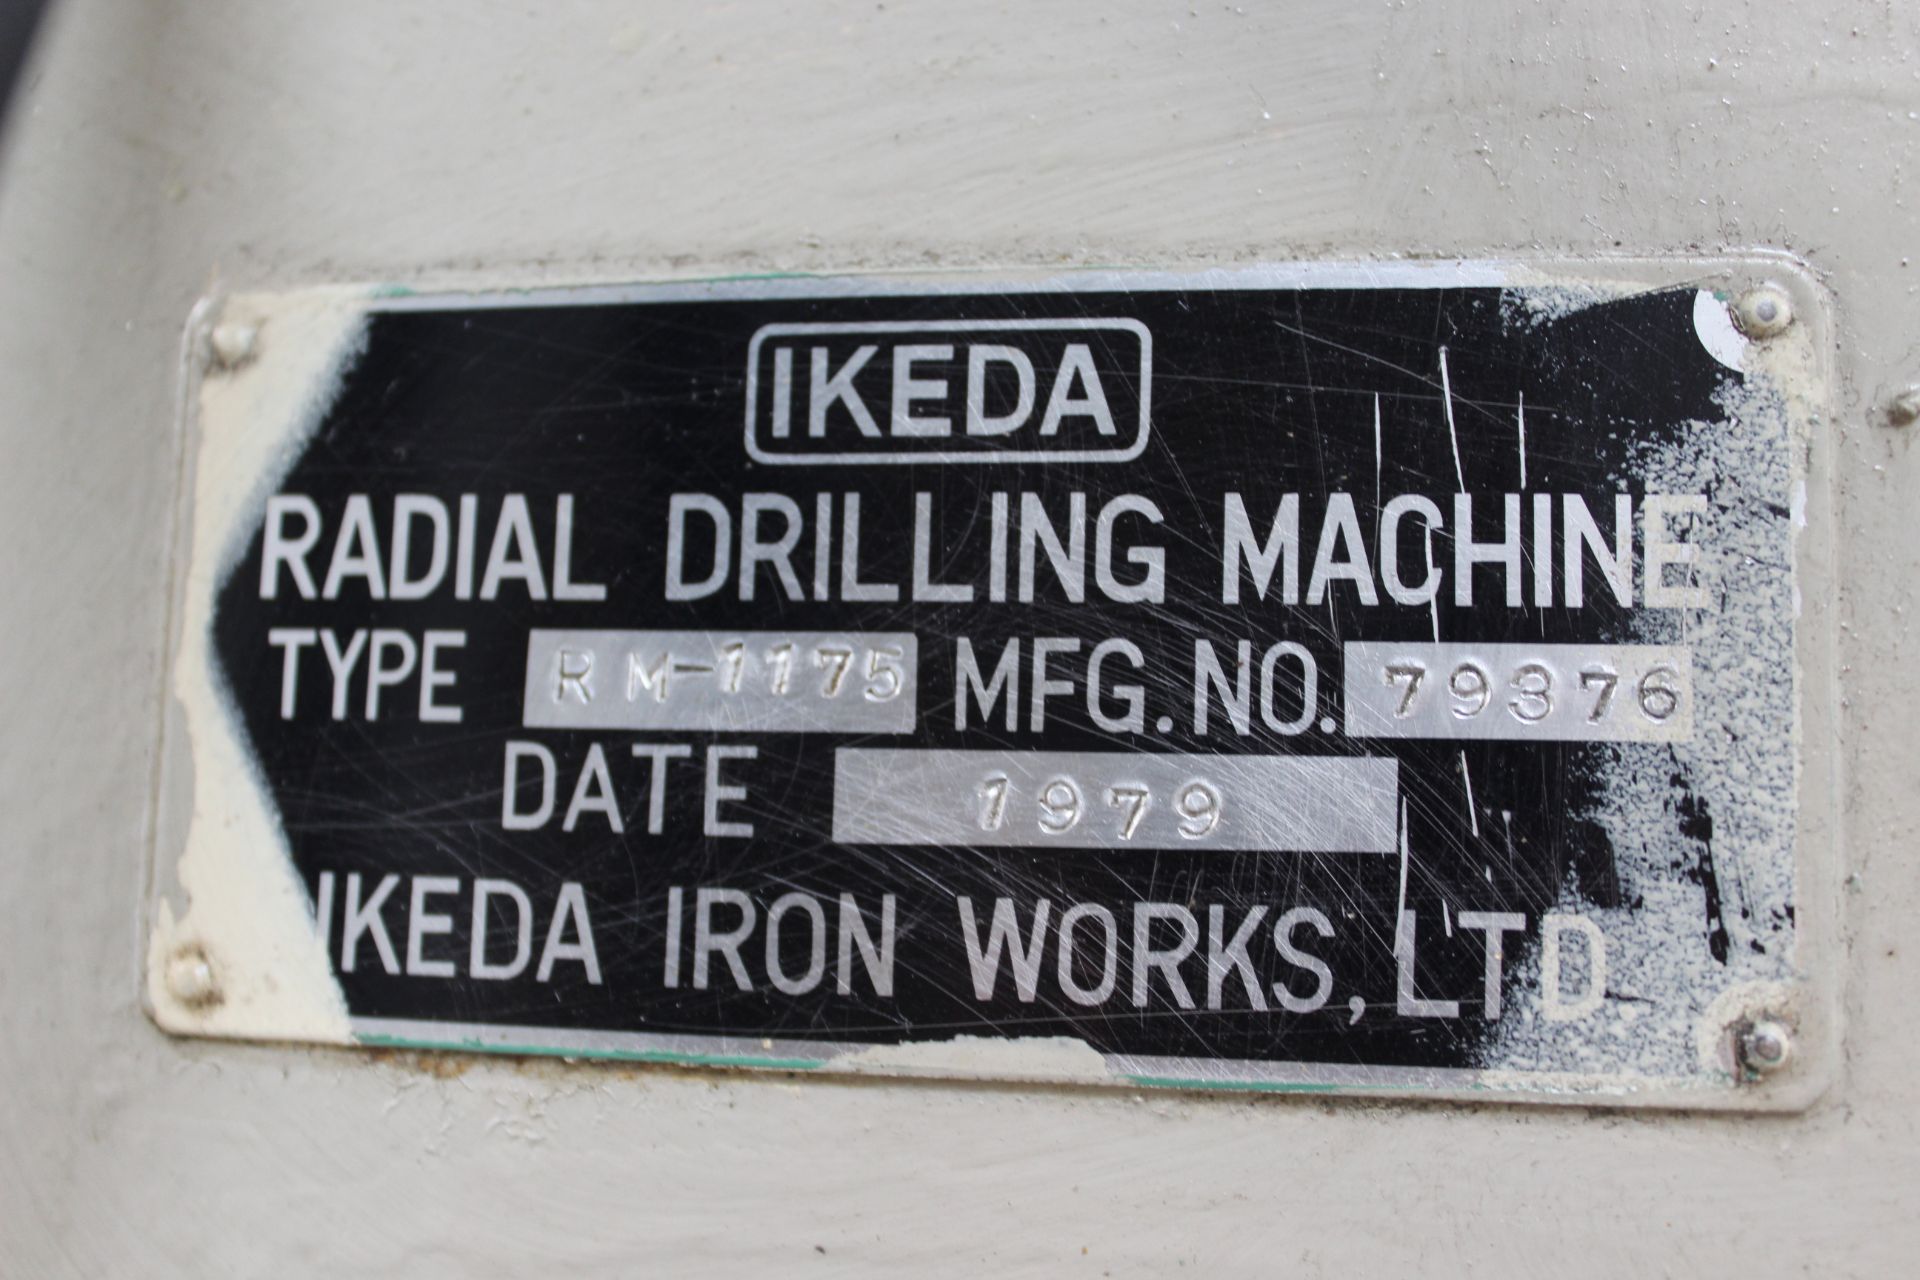 4’ x 13” Ikeda RM-1175 Radial Drill, New 1979, S/N 79376 - Image 4 of 4